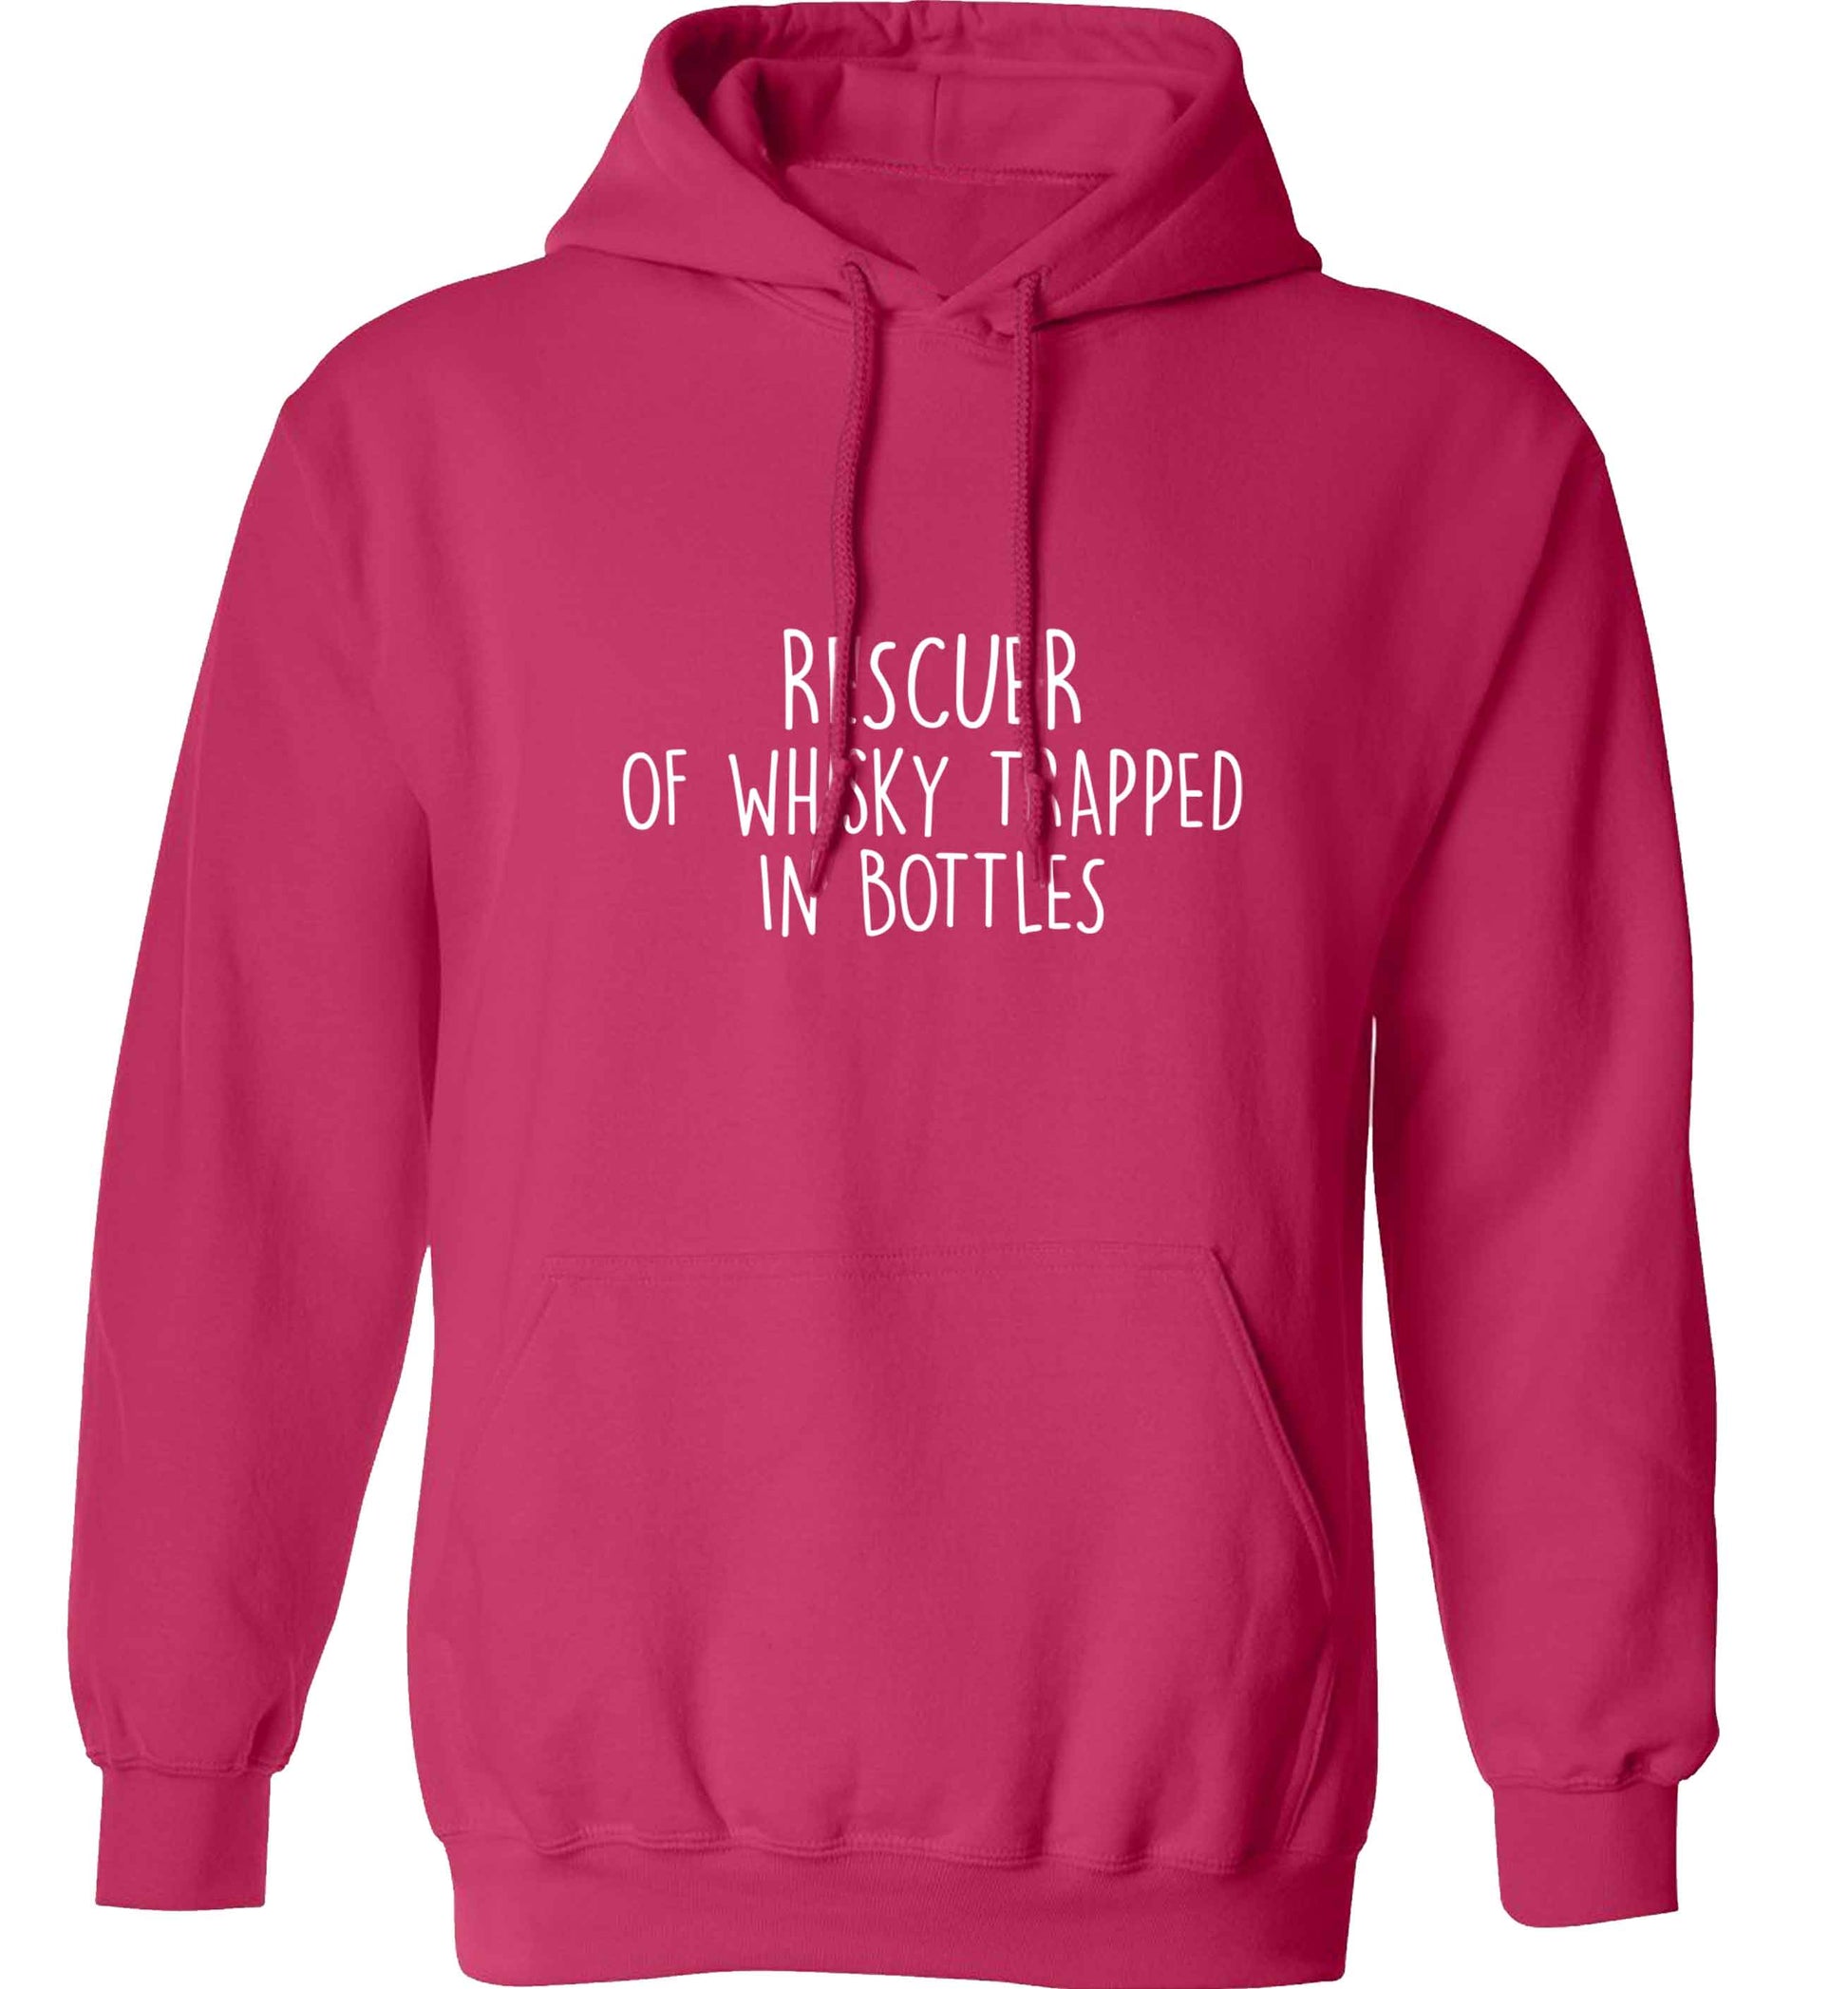 Rescuer of whisky trapped in bottles adults unisex pink hoodie 2XL